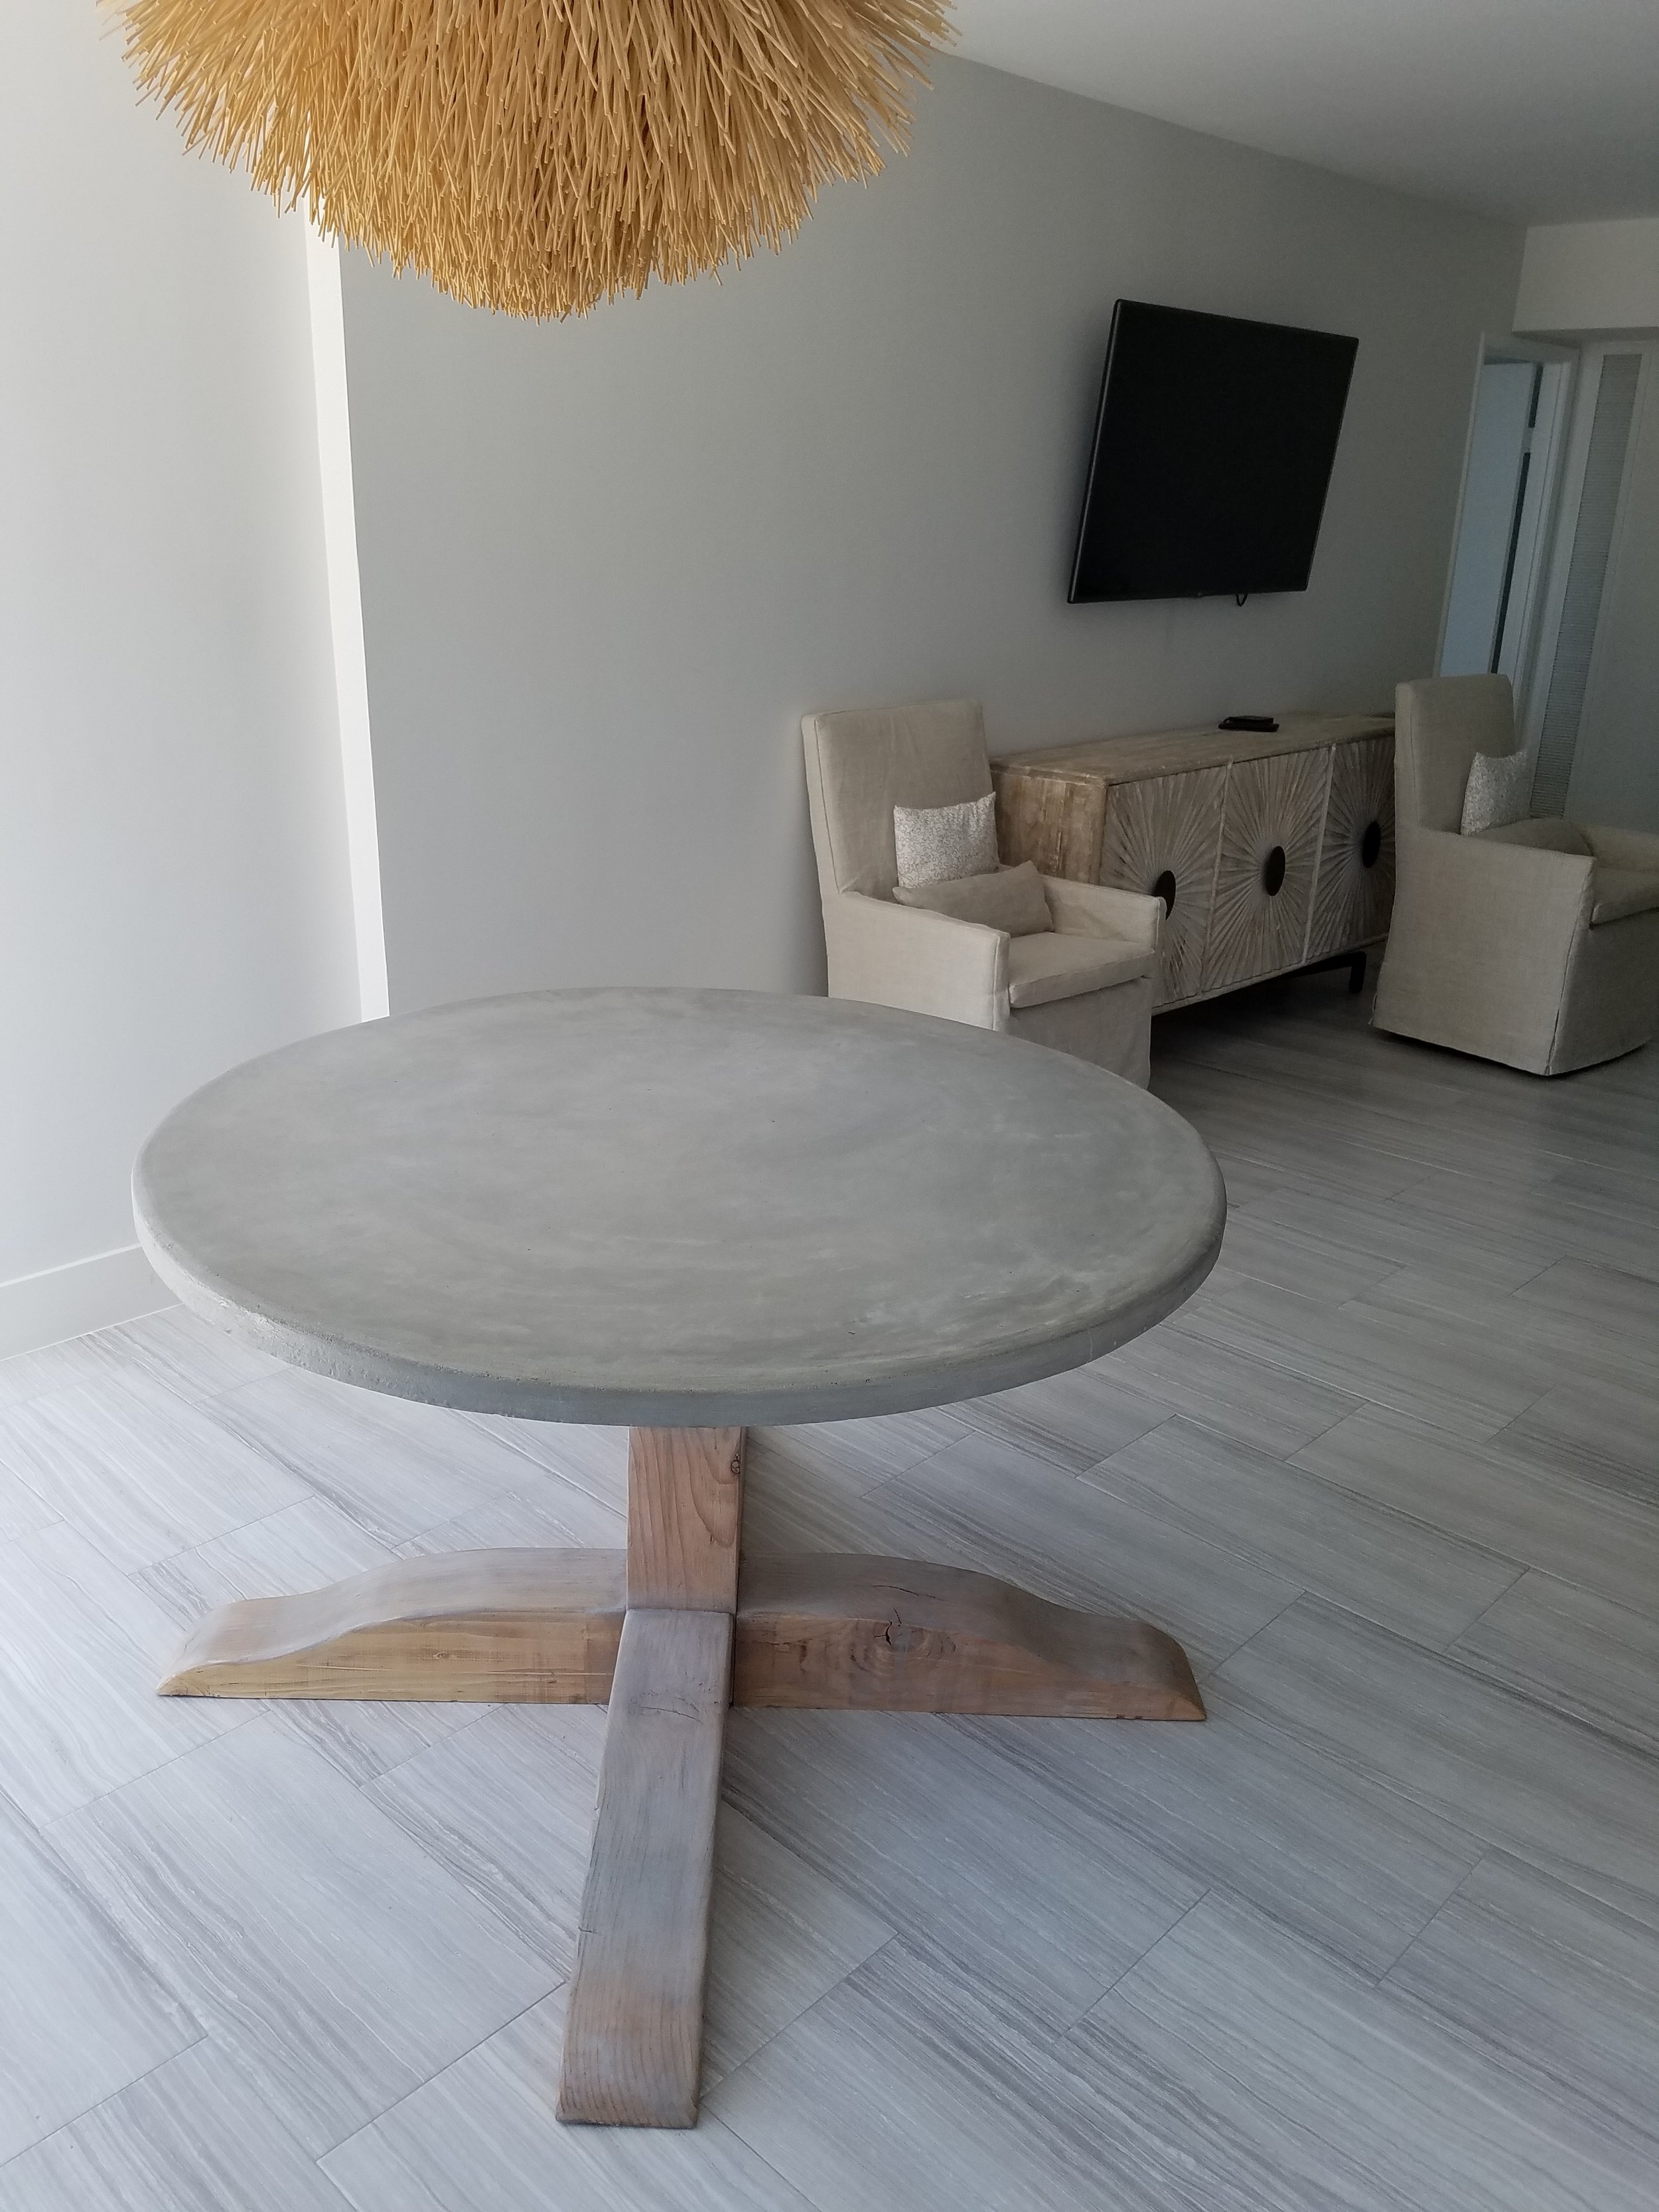 Pedestal Table with Round Polished Concrete Top